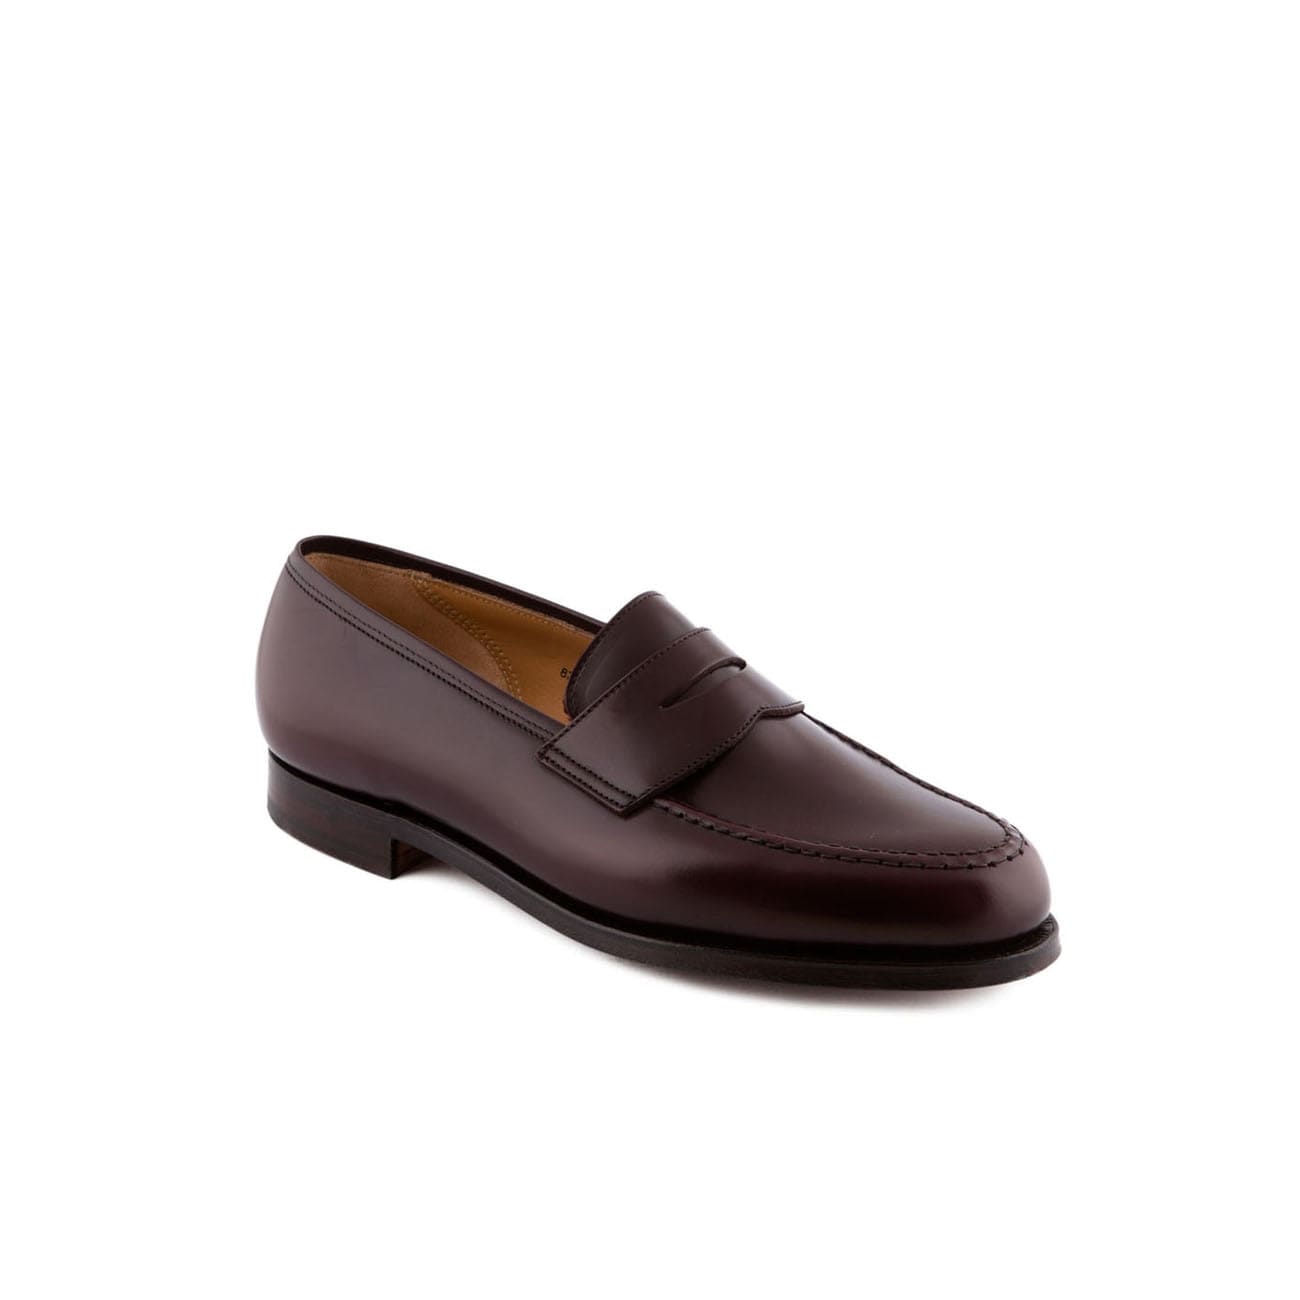 Boston Burgundy Cavalry Polished Calf Penny Loafer